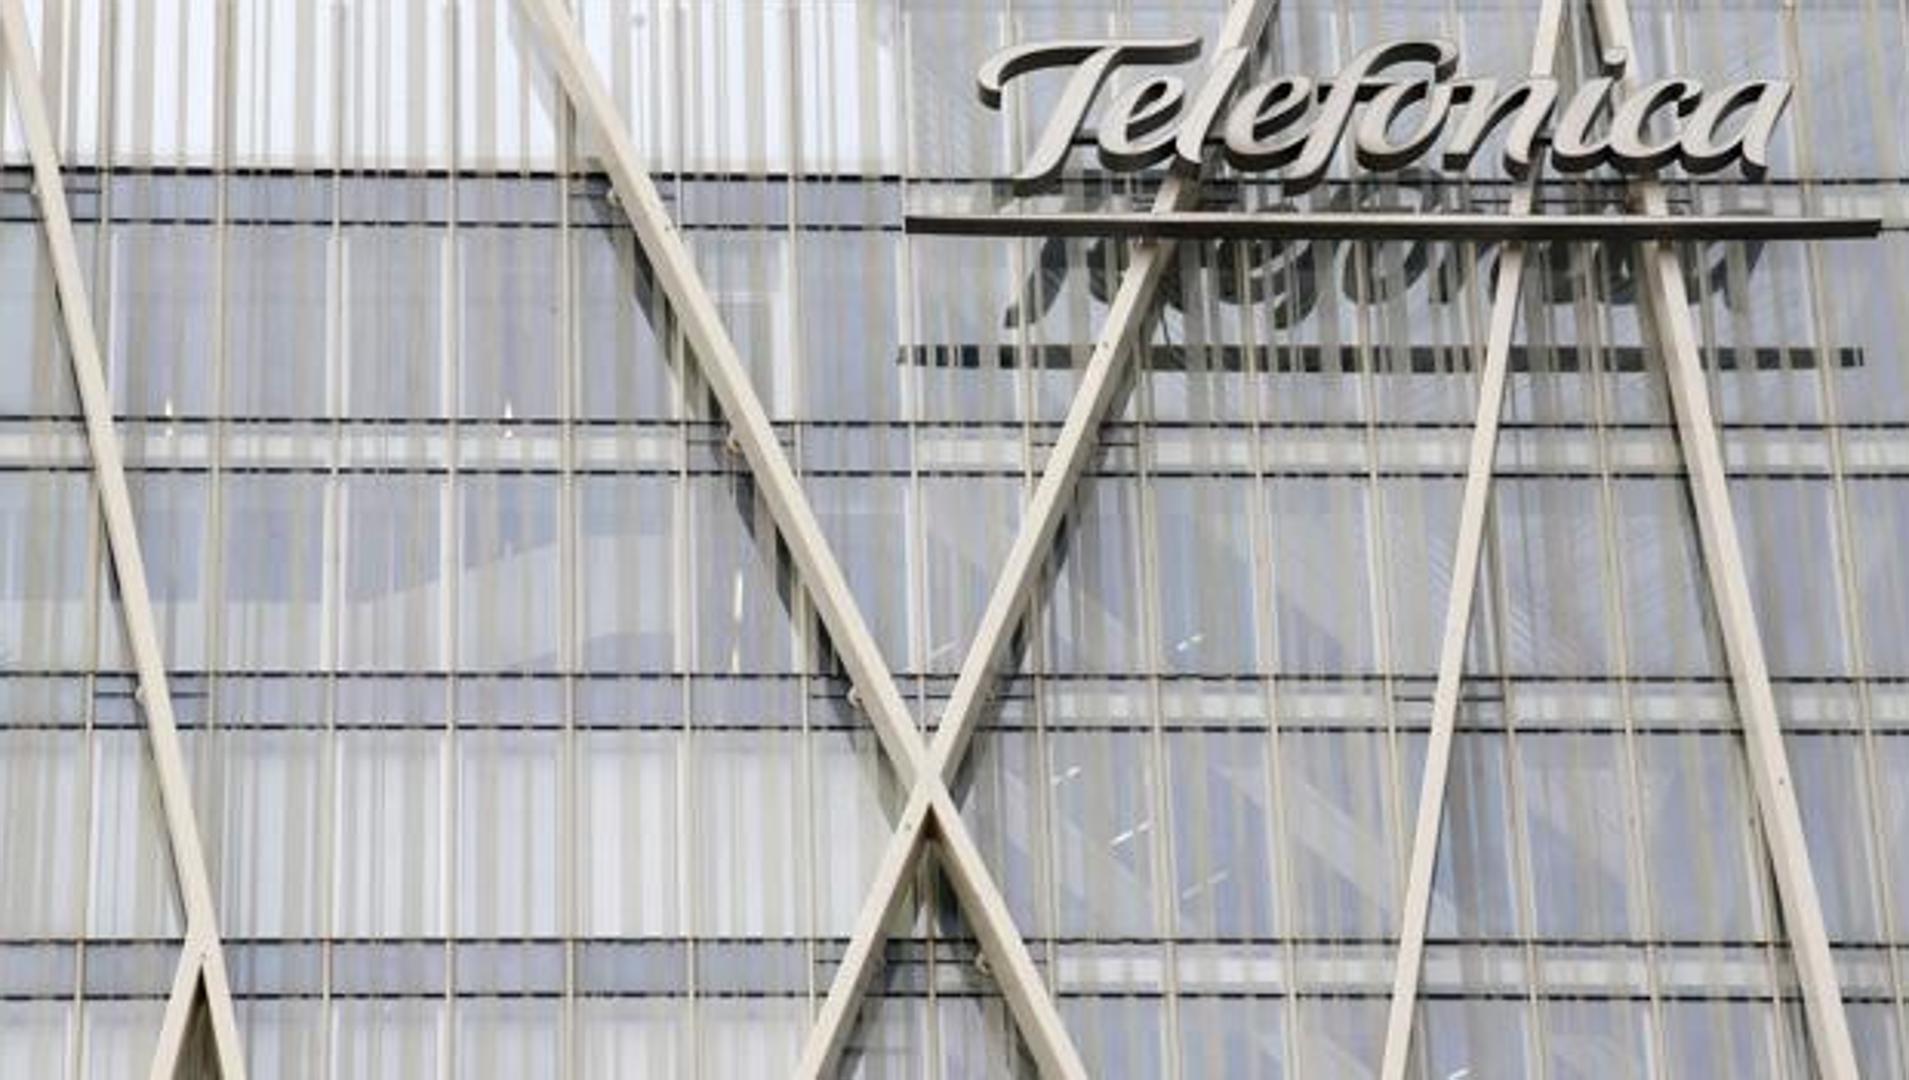 The main operator in Saudi Arabia, Telefónica's first shareholder by buying almost 10% of the company